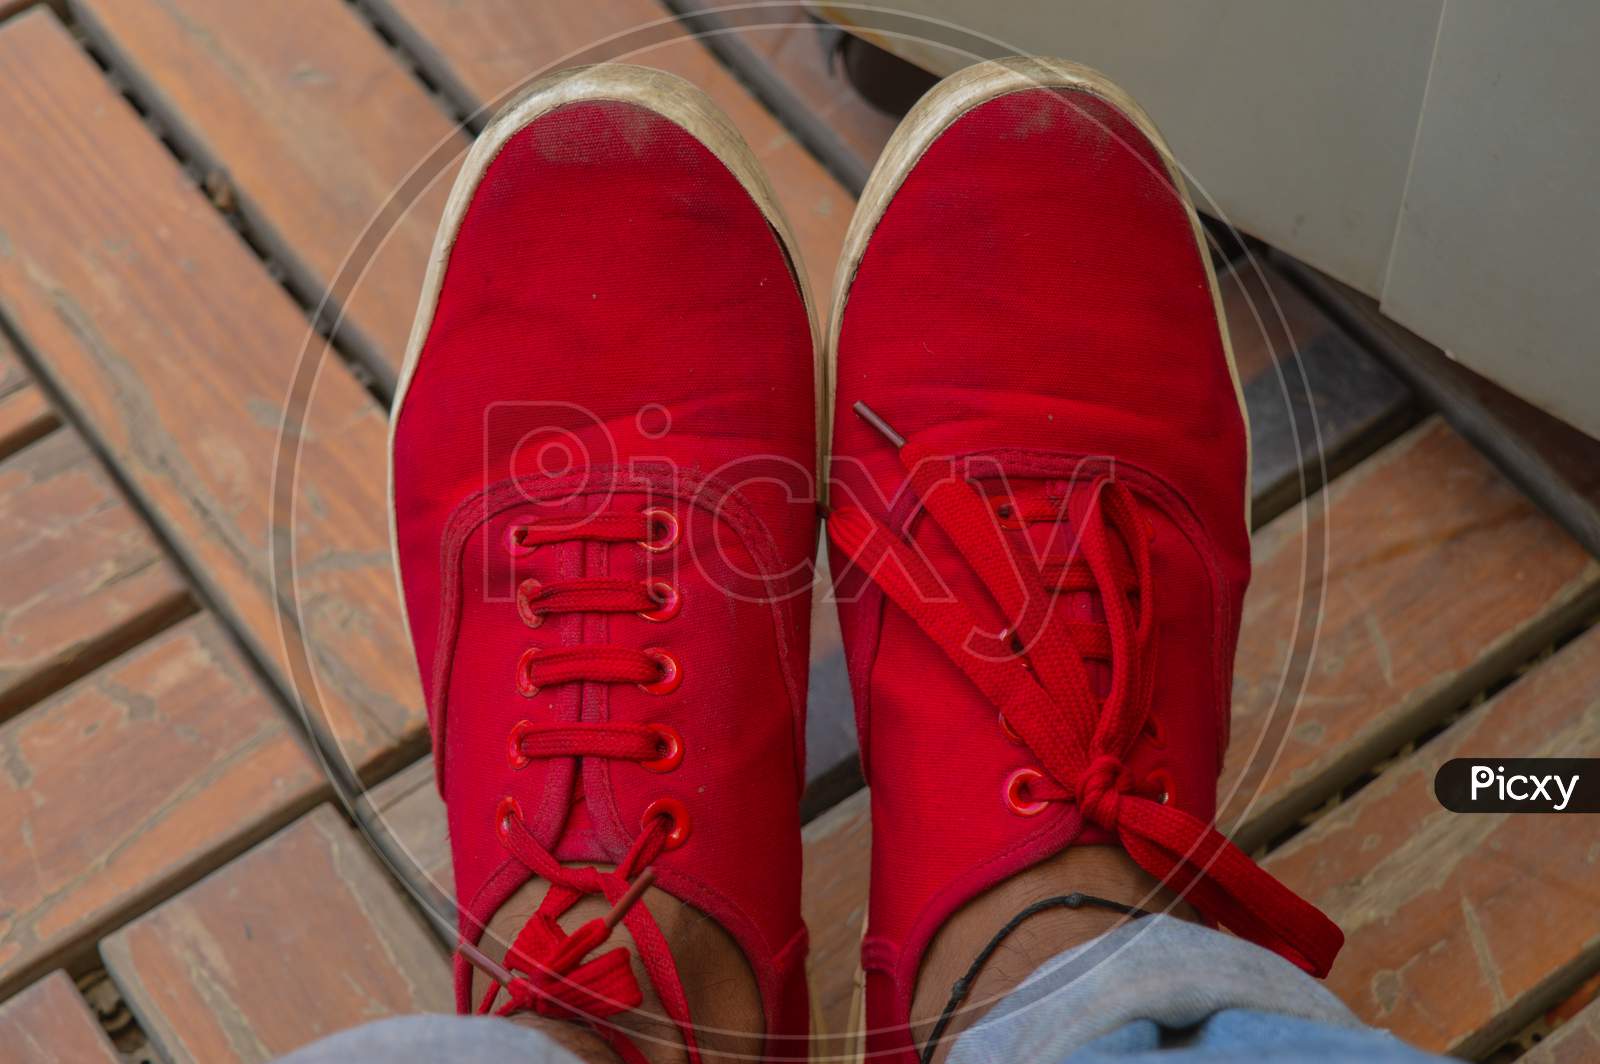 A Pair Of Dirty Red Shoes.